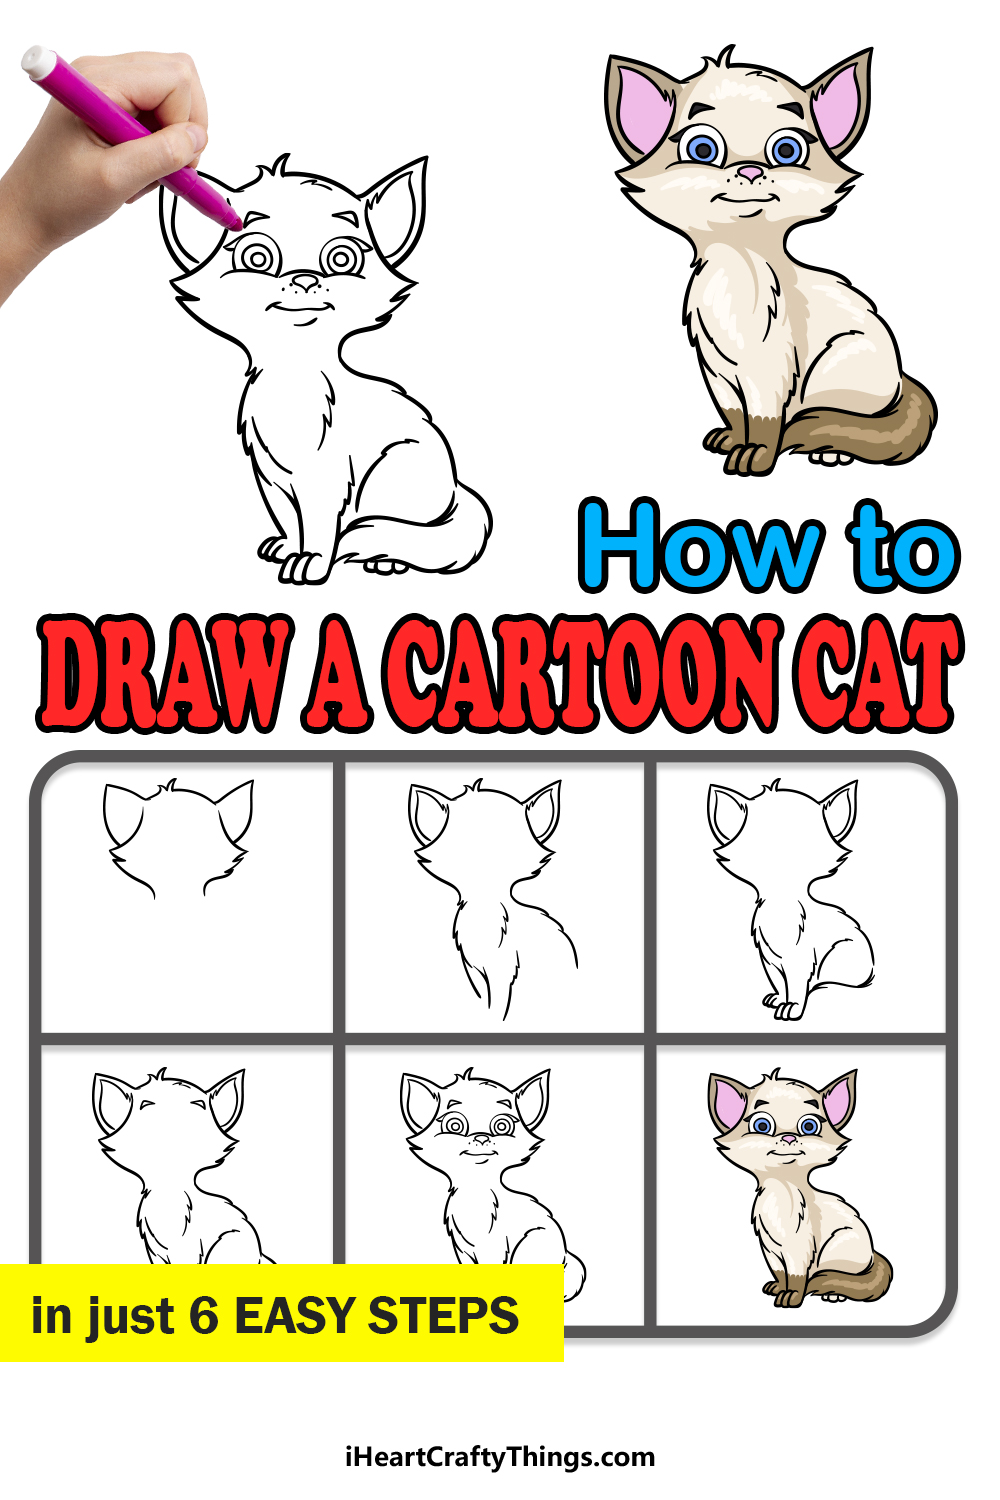 Cartoon Cat Drawing - How To Draw A Cartoon Cat Step By Step